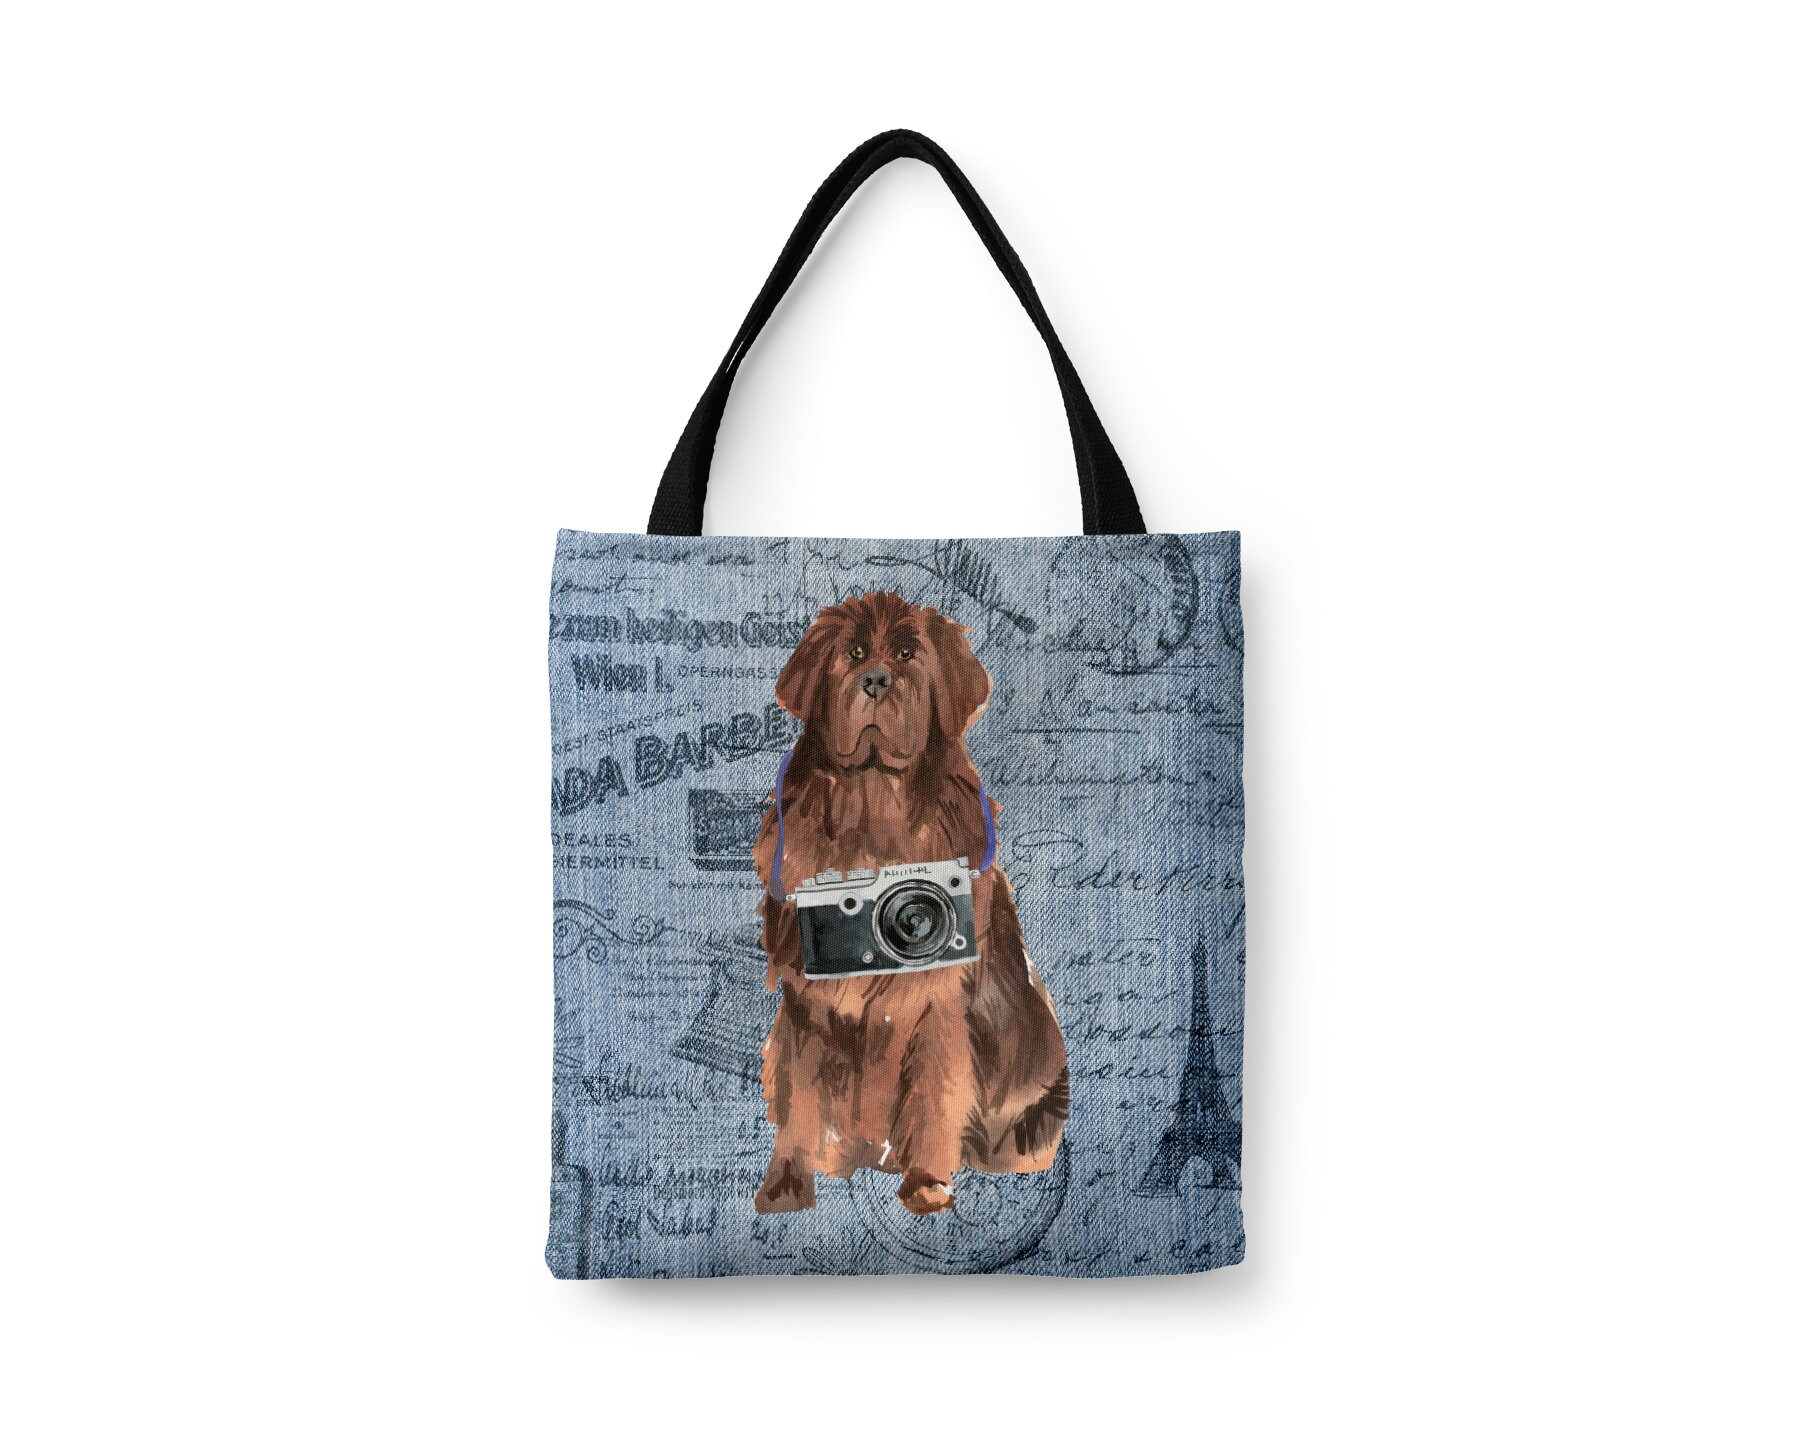 Newfoundland Dog Tote Bag Illustrated Dogs & 6 Denim Inspired Styles. All Purpose Ideal For Shopping, Laptop. Newf/Newfie